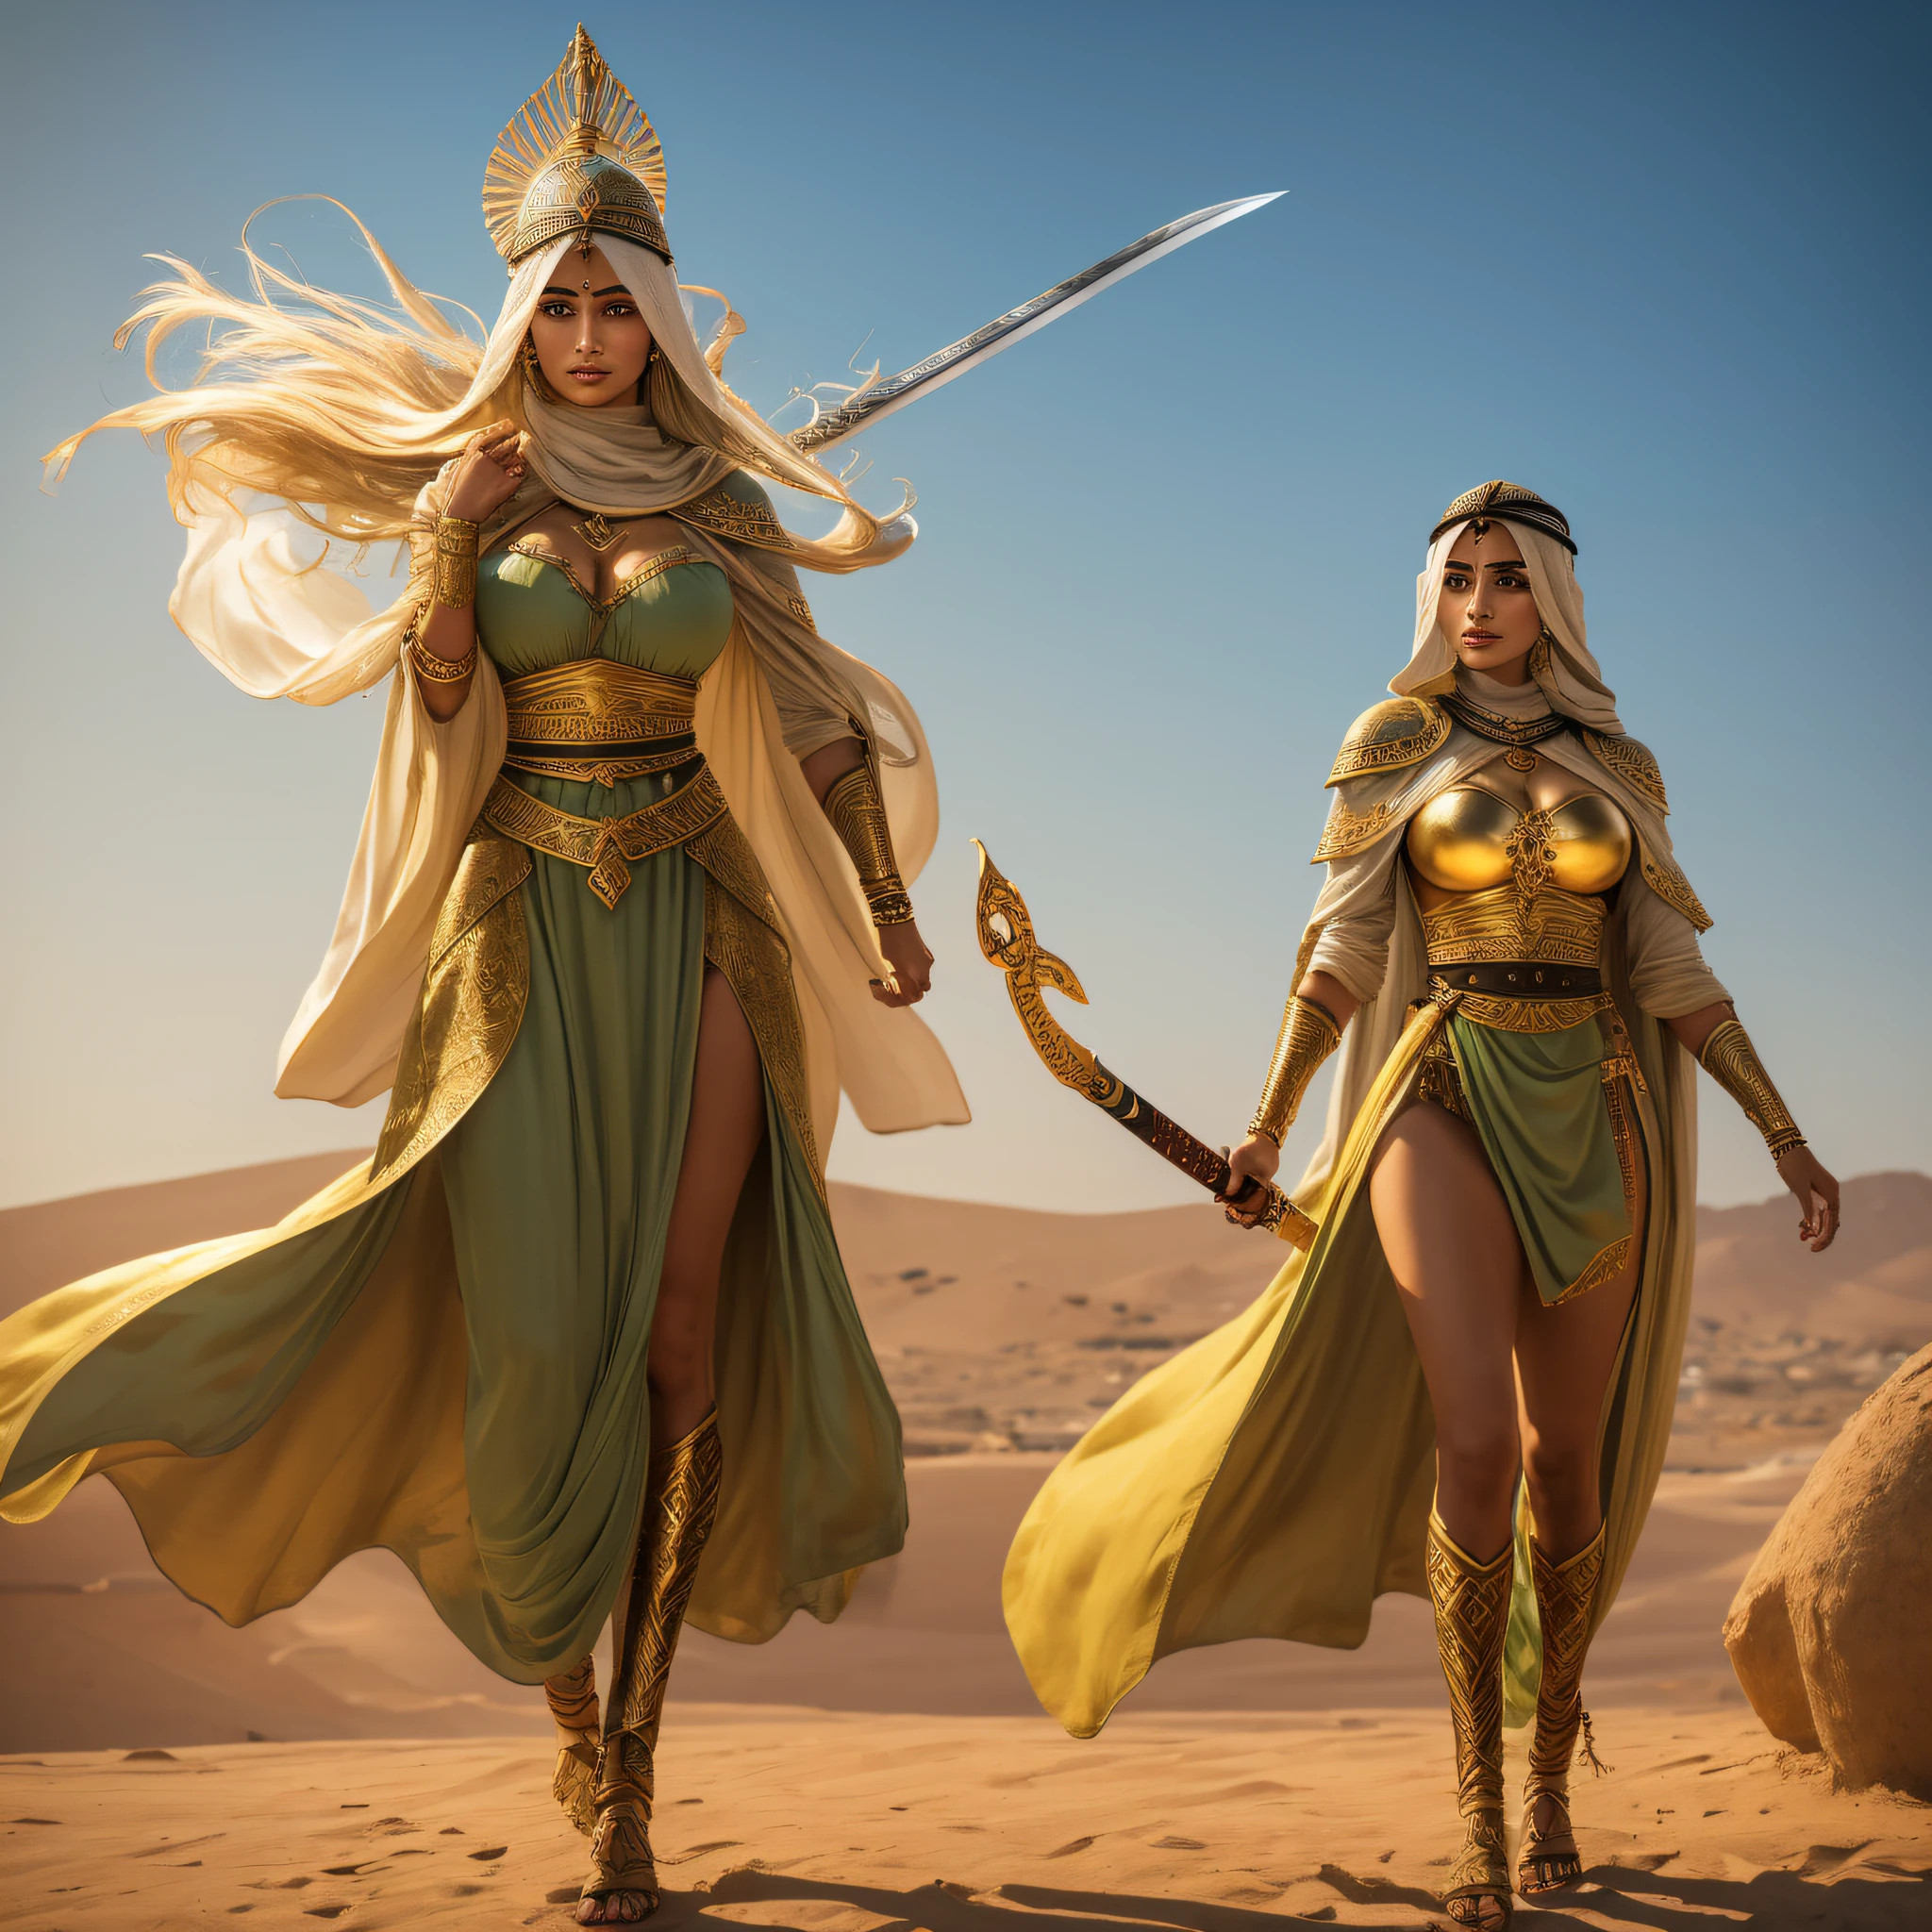 ( obra-prima ), ( UHD ), ( perfect  lighting ), ( Construction of the body of delicate character ), ( Simetria do rosto da personagem perfeitos ), ( 8k ), A beautiful Arab warrior with an Arab sword, cabelo liso, olhos verdes, Arabic warrior costume, ( Hair dripping there wind ), golden tunic, ( fluttering tunic), Arab scenery at dusk.